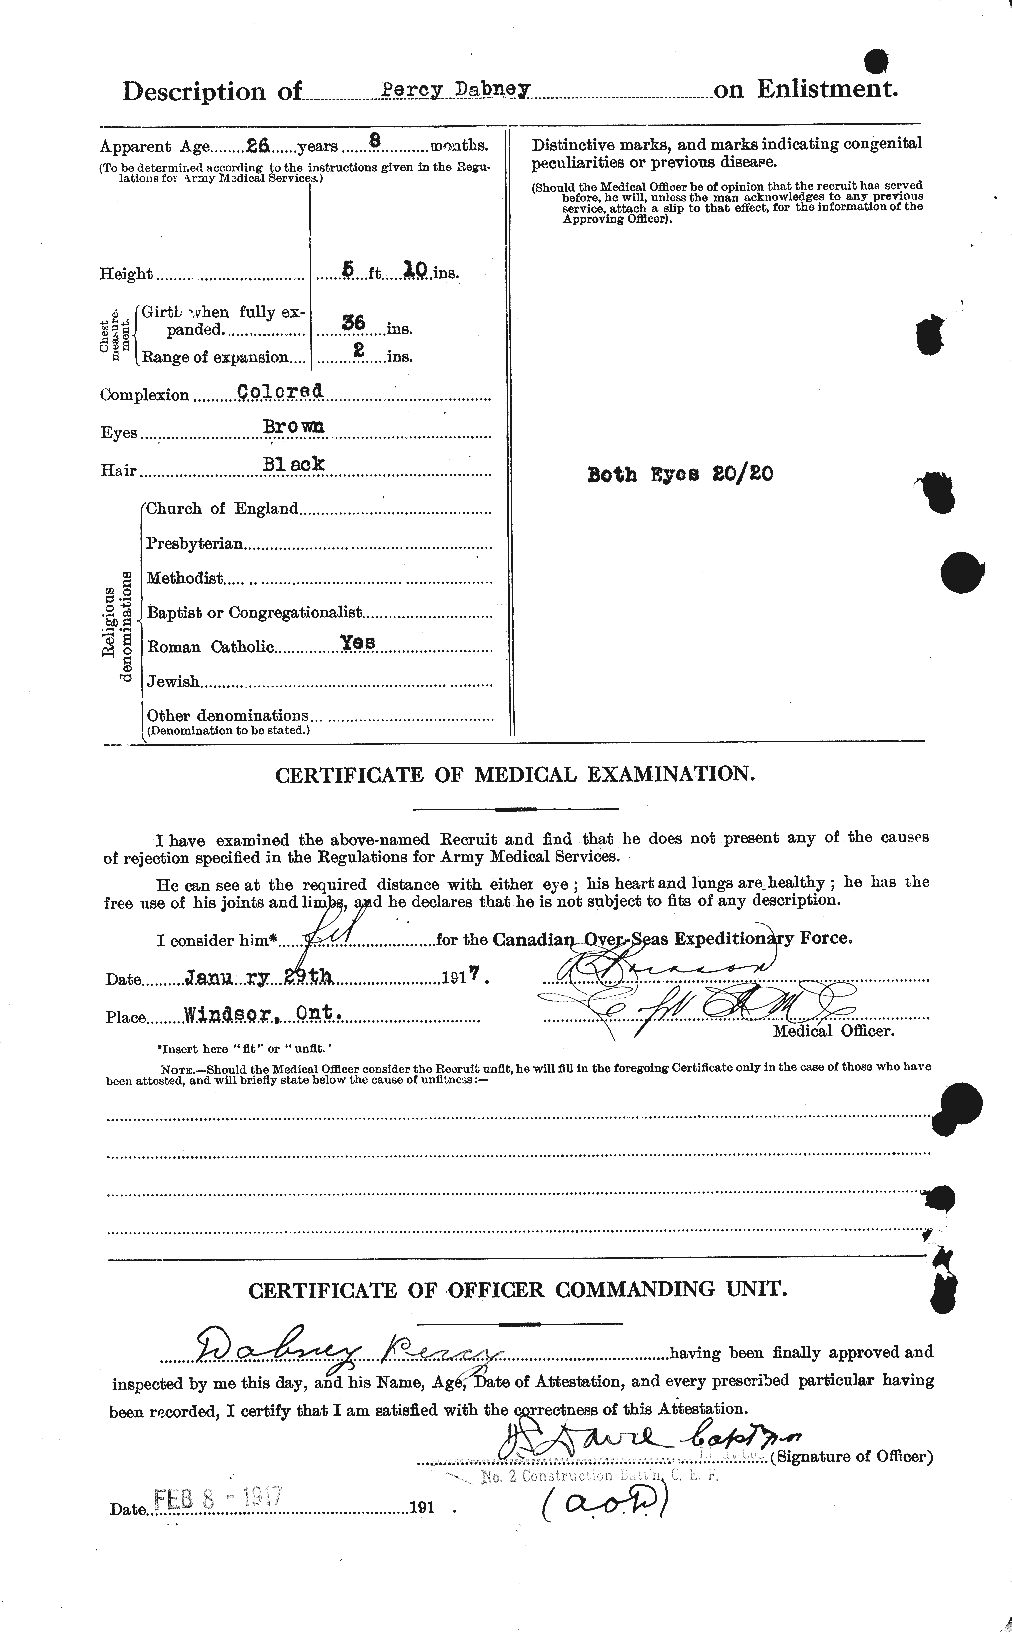 Personnel Records of the First World War - CEF 275163b